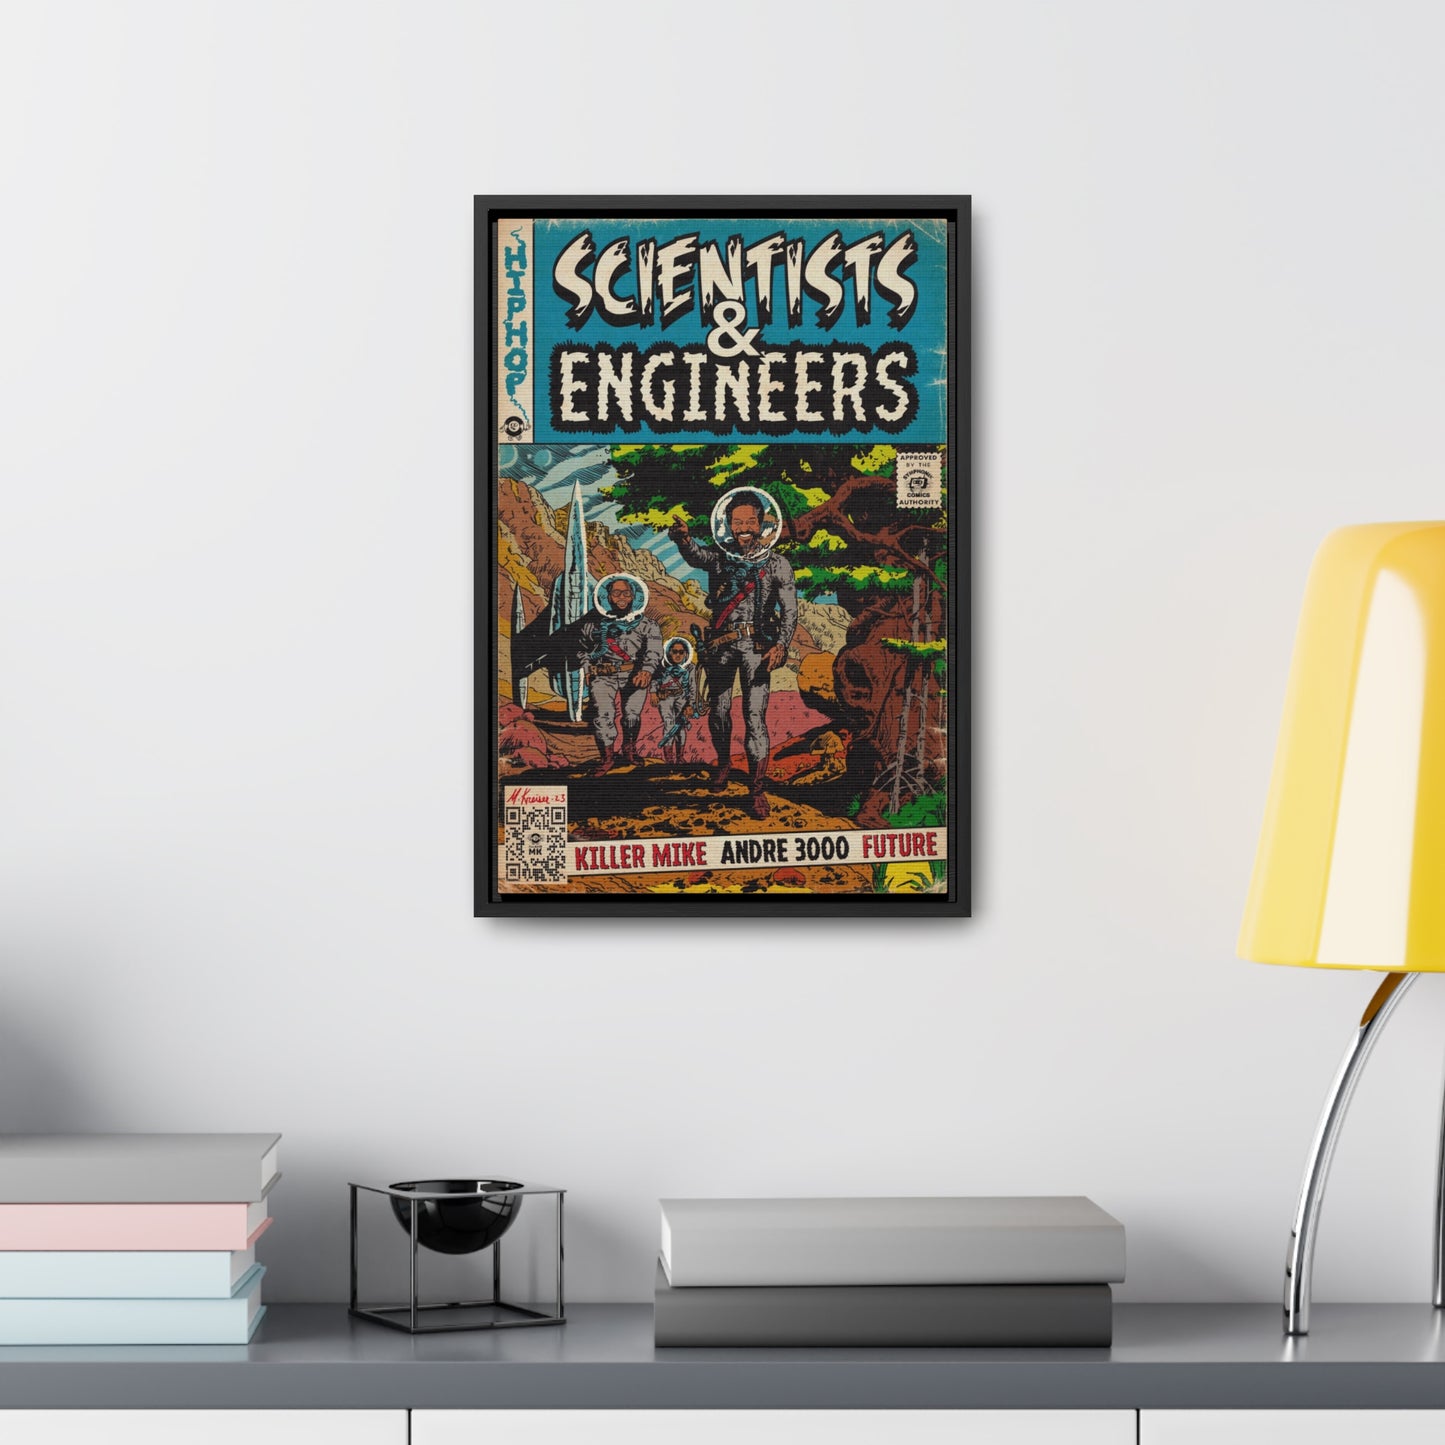 Killer Mike - Scientists & Engineers - Andre 3000 - Future - Gallery Canvas Wraps, Vertical Frame